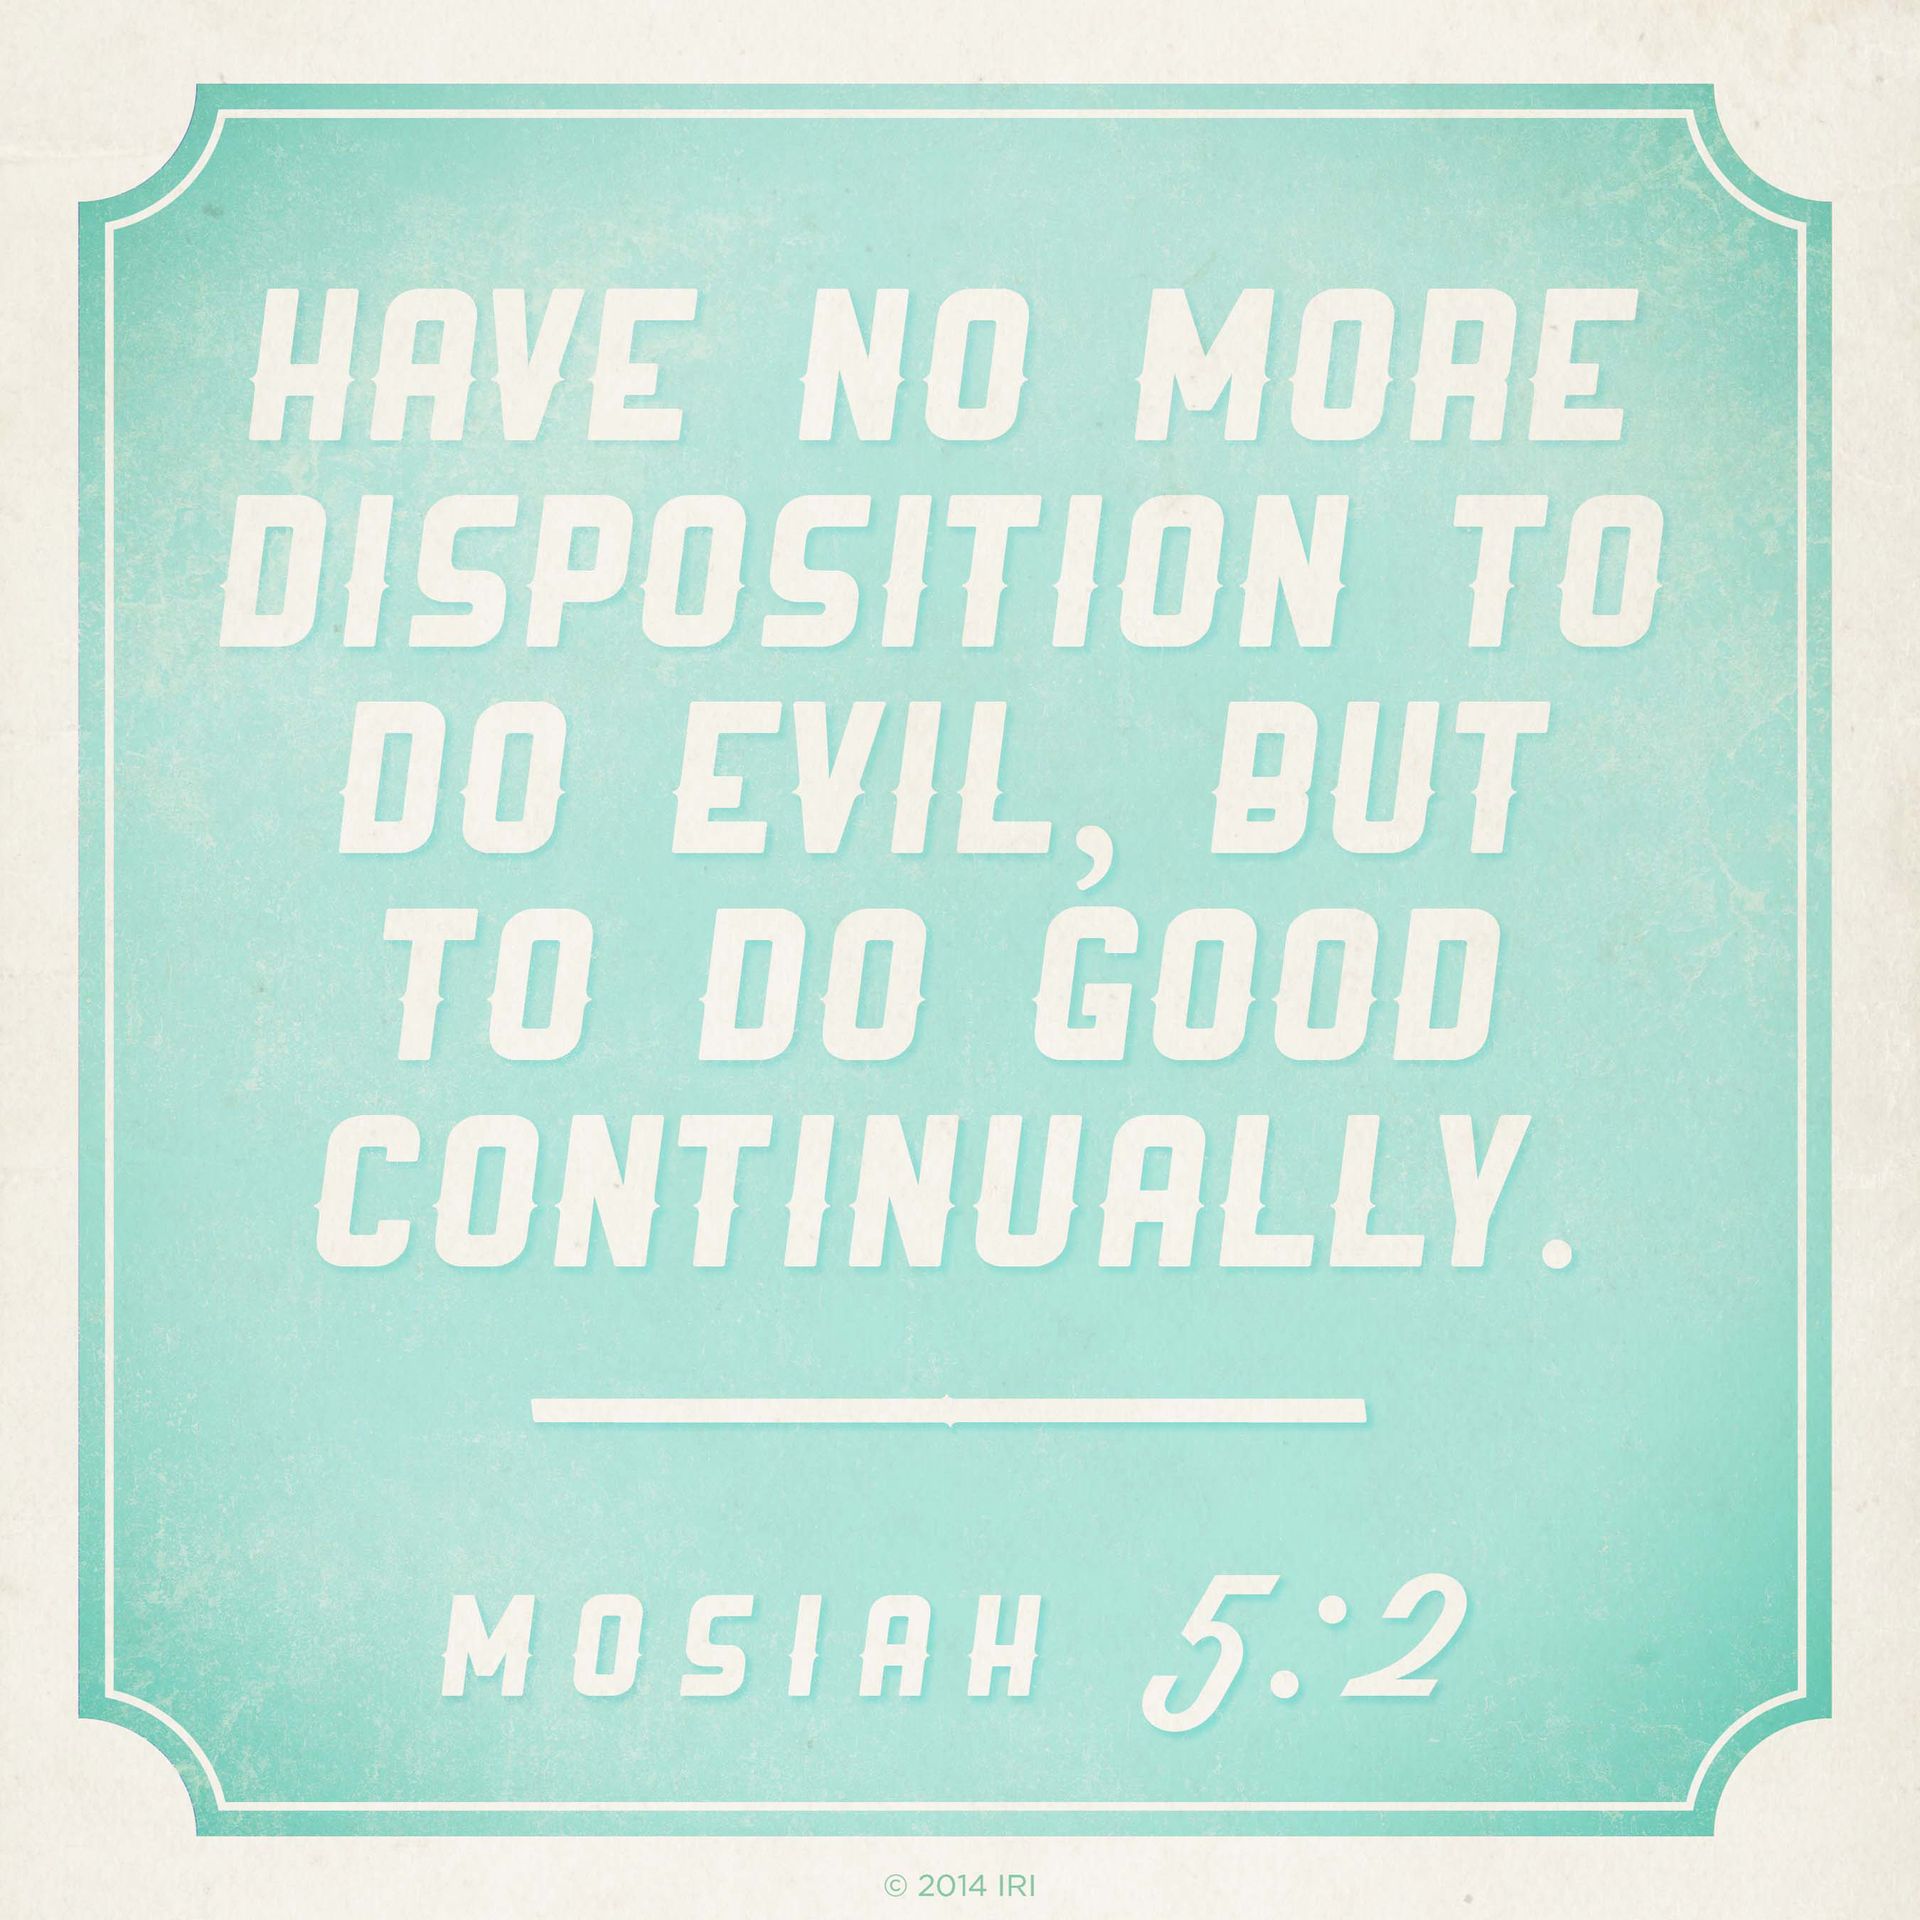 “Have no more disposition to do evil, but to do good continually.”—Mosiah 5:2